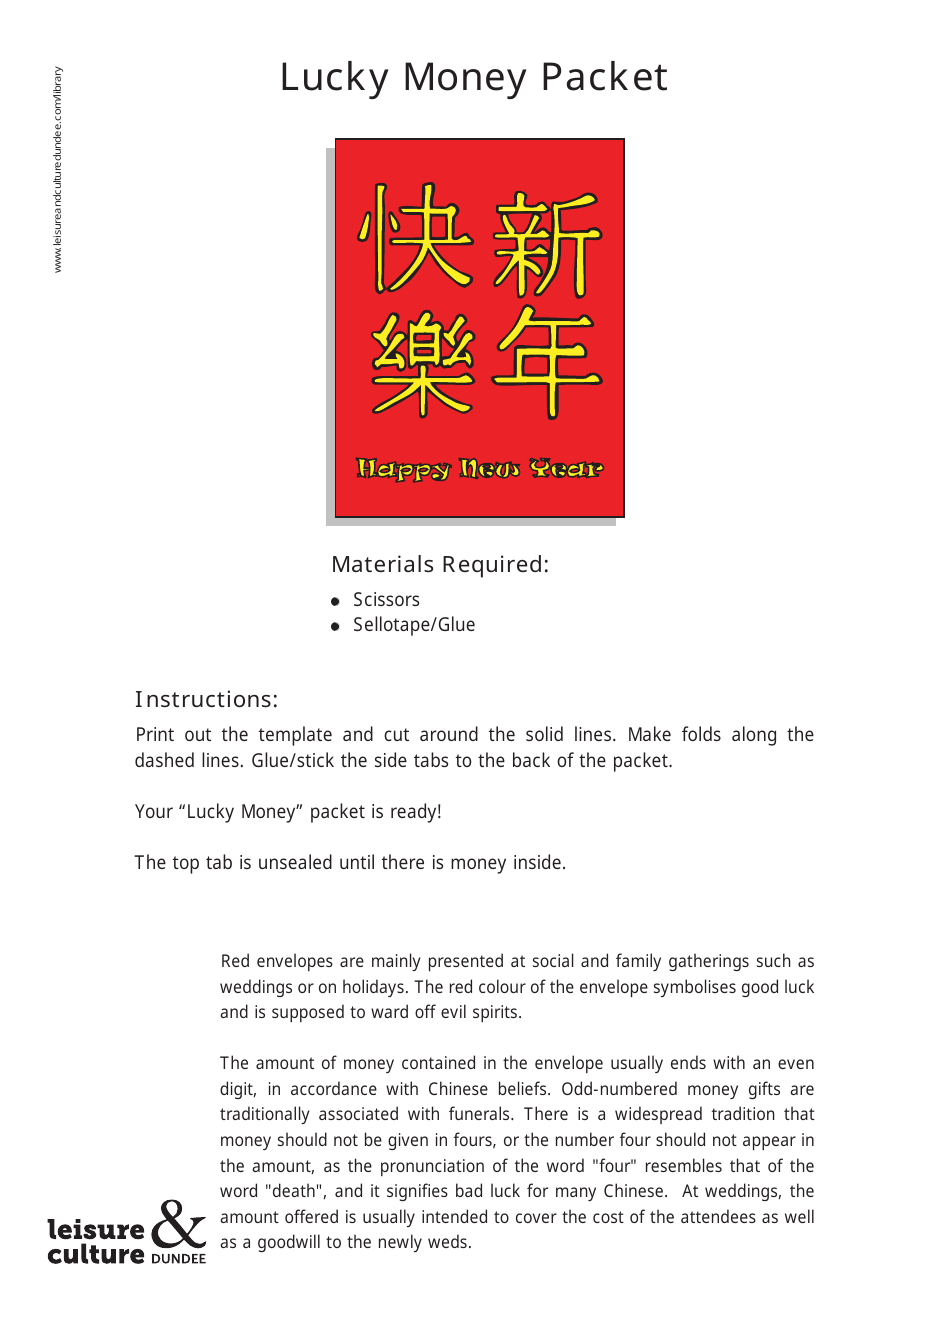 Chinese New Year Lucky Money Packet Template – Celebrate the auspicious Chinese New Year season with our beautifully designed Lucky Money Packet Template. These traditional envelopes, traditionally used to gift money on this festive occasion, come with an intricate and vibrant design that symbolizes good luck and prosperity. Use this template to create your own personalized envelopes that not only convey your heartfelt wishes but also create a lasting impression on your loved ones. Download now and make this Chinese New Year extra special with our Lucky Money Packet Template.